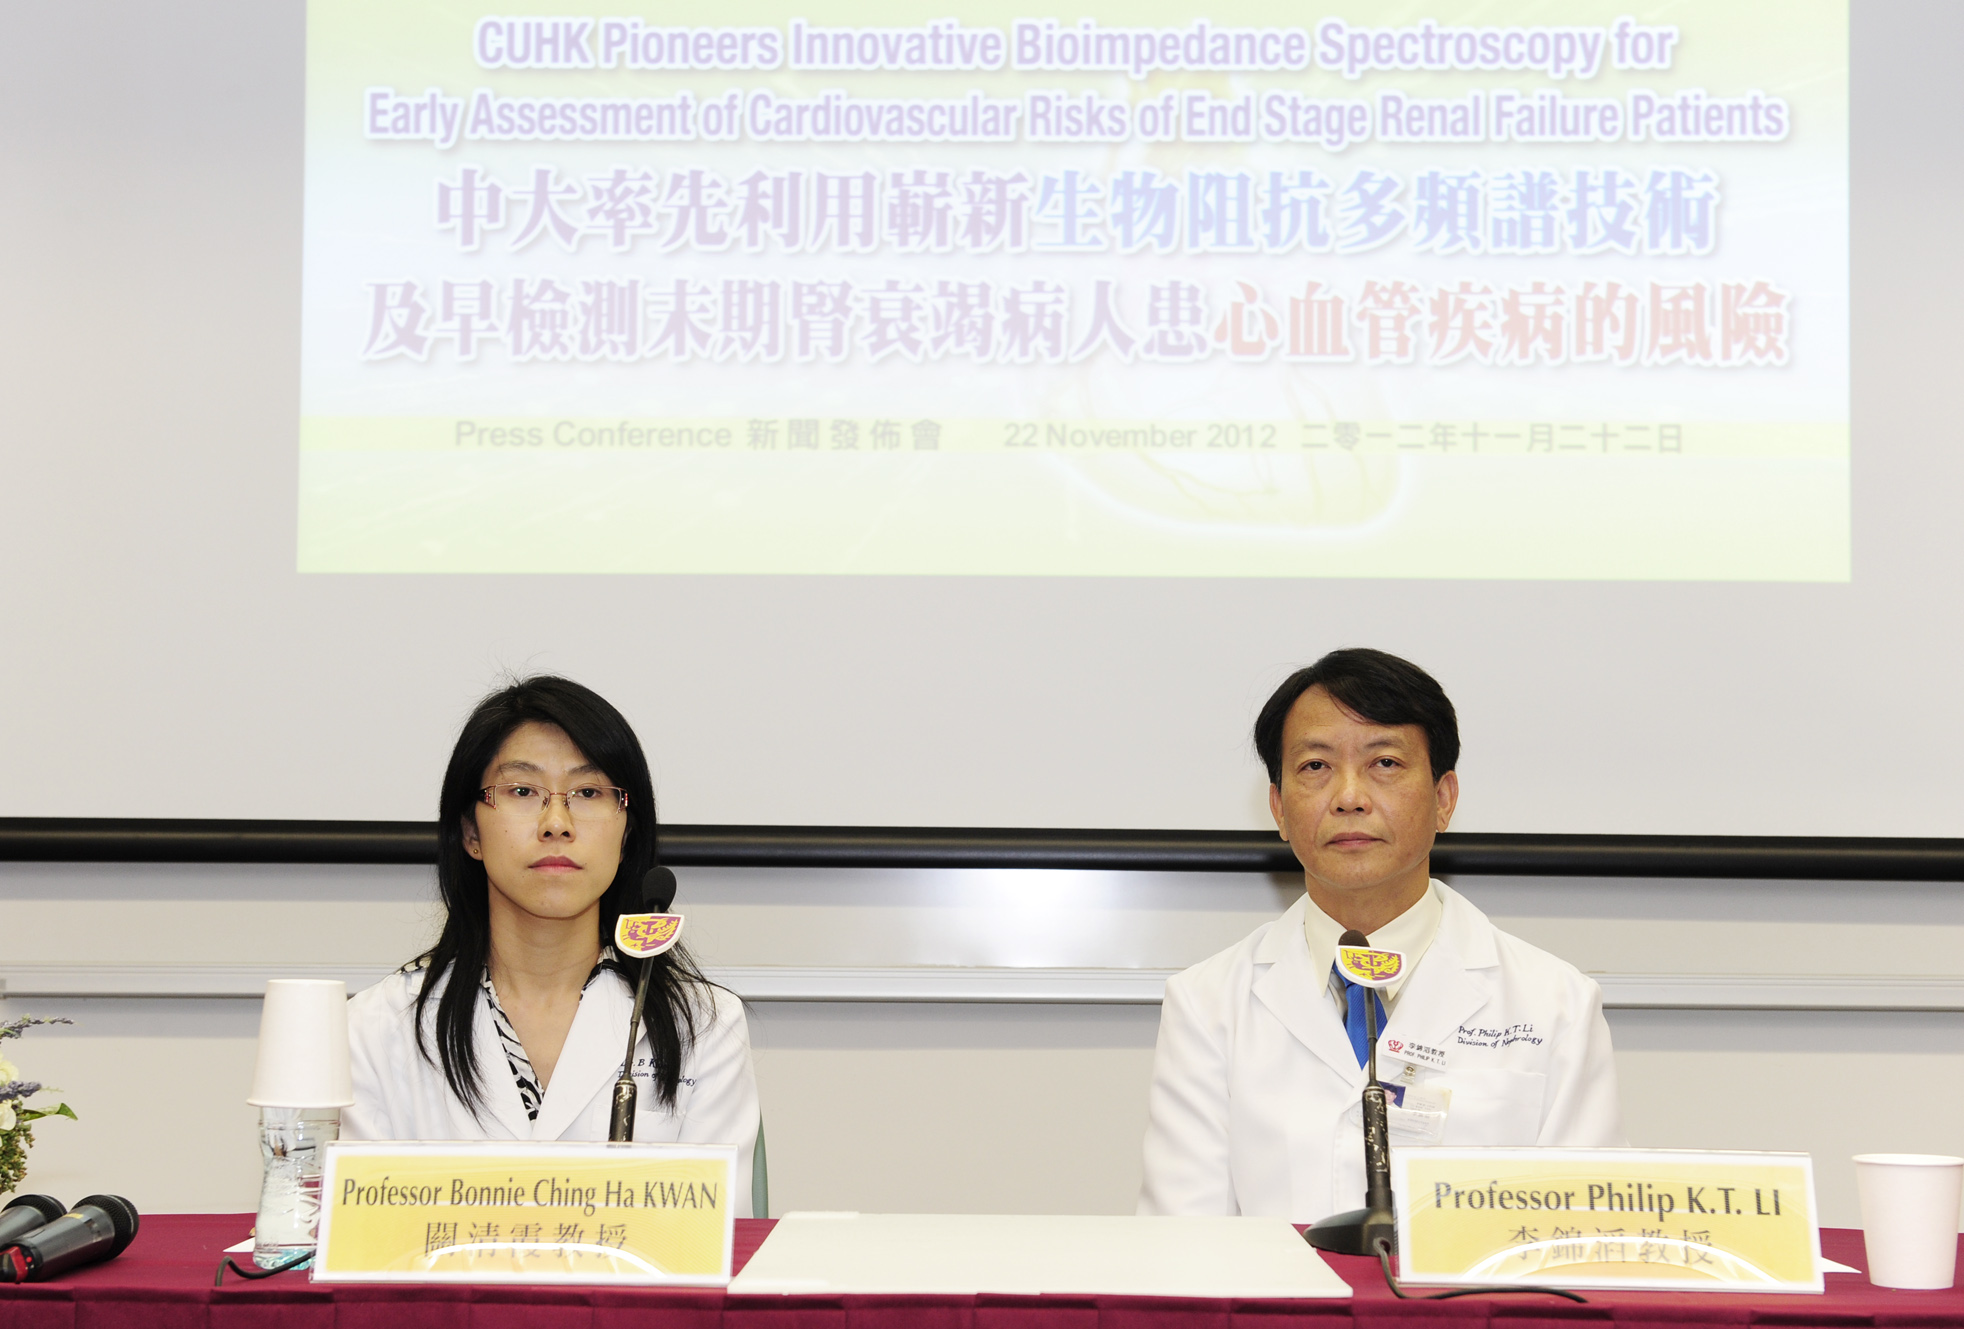 (FROM LEFT) Professor Bonnie Ching Ha KWAN, Associate Professor, Division of Nephrology, Department of Medicine and Therapeutics, CUHK; and Prof Philip Kam Tao LI, Chief of Division of Nephrology and Honorary Professor, Department of Medicine and Therapeutics, CUHK present their recent research on how Bioimpedance Spectroscopy helps detecting fluid overload among the end stage renal failure patients so as to improve their cardiovascular health